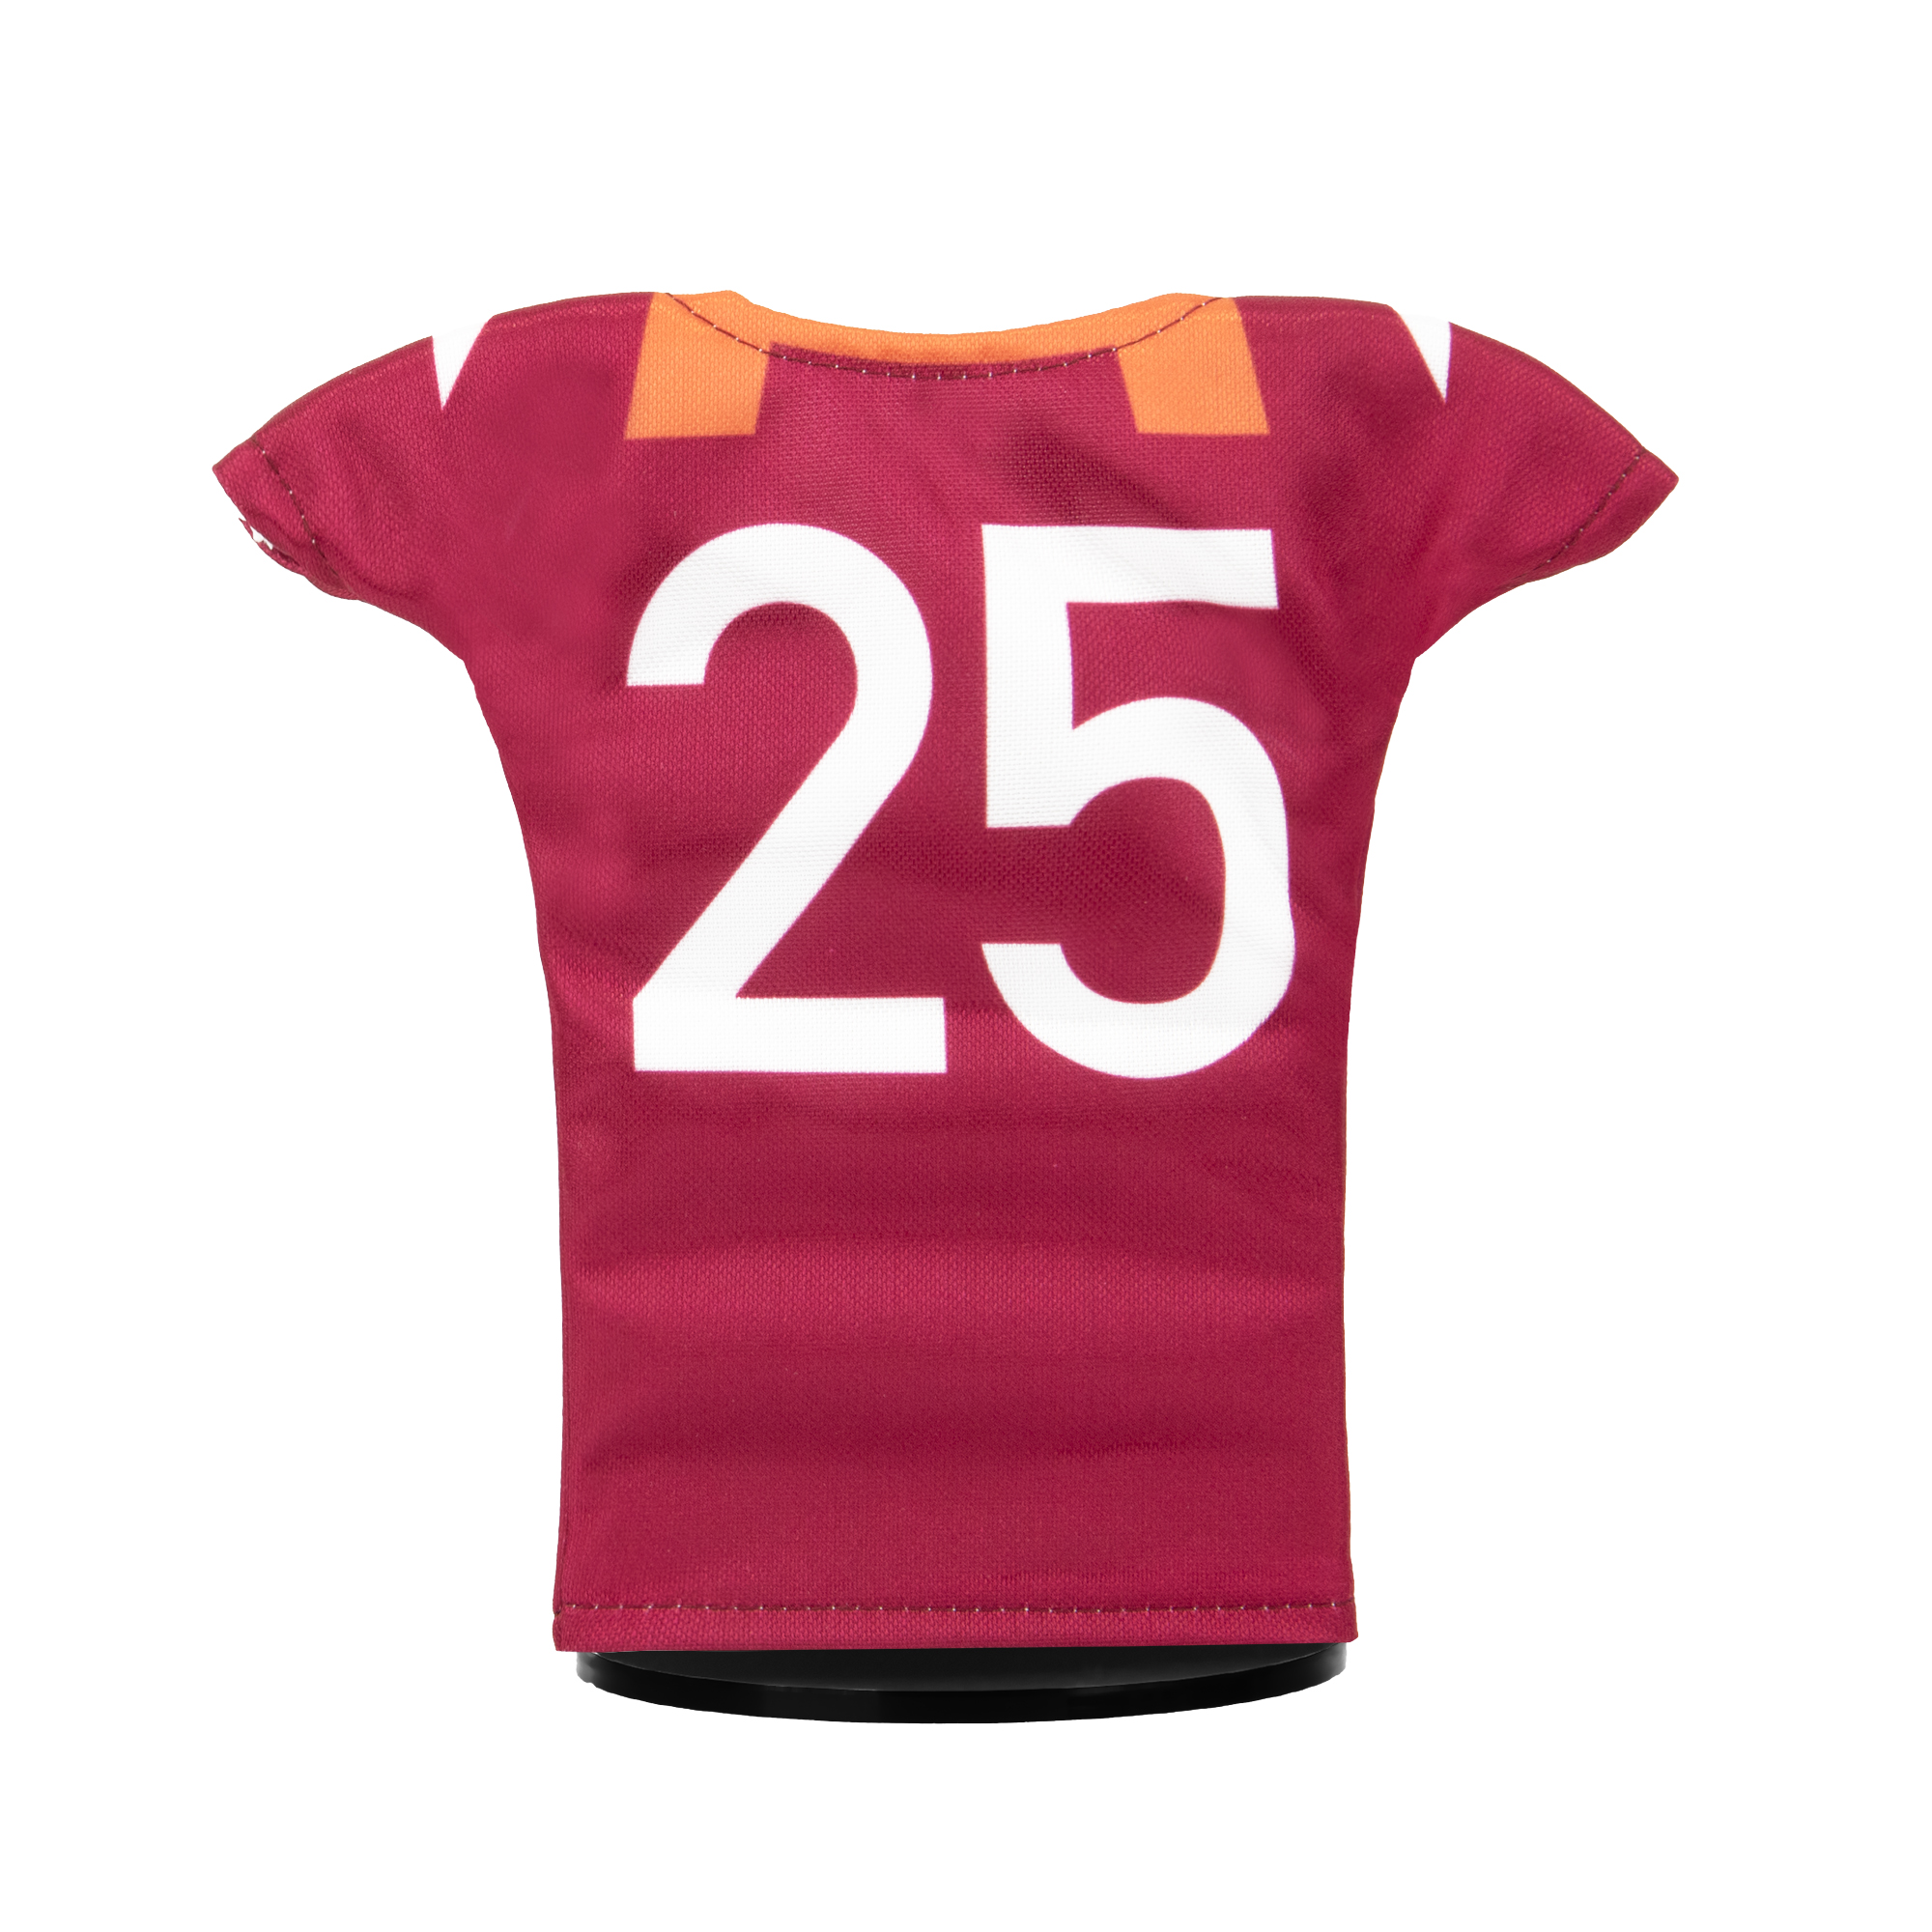 Hokies soccer jersey collection